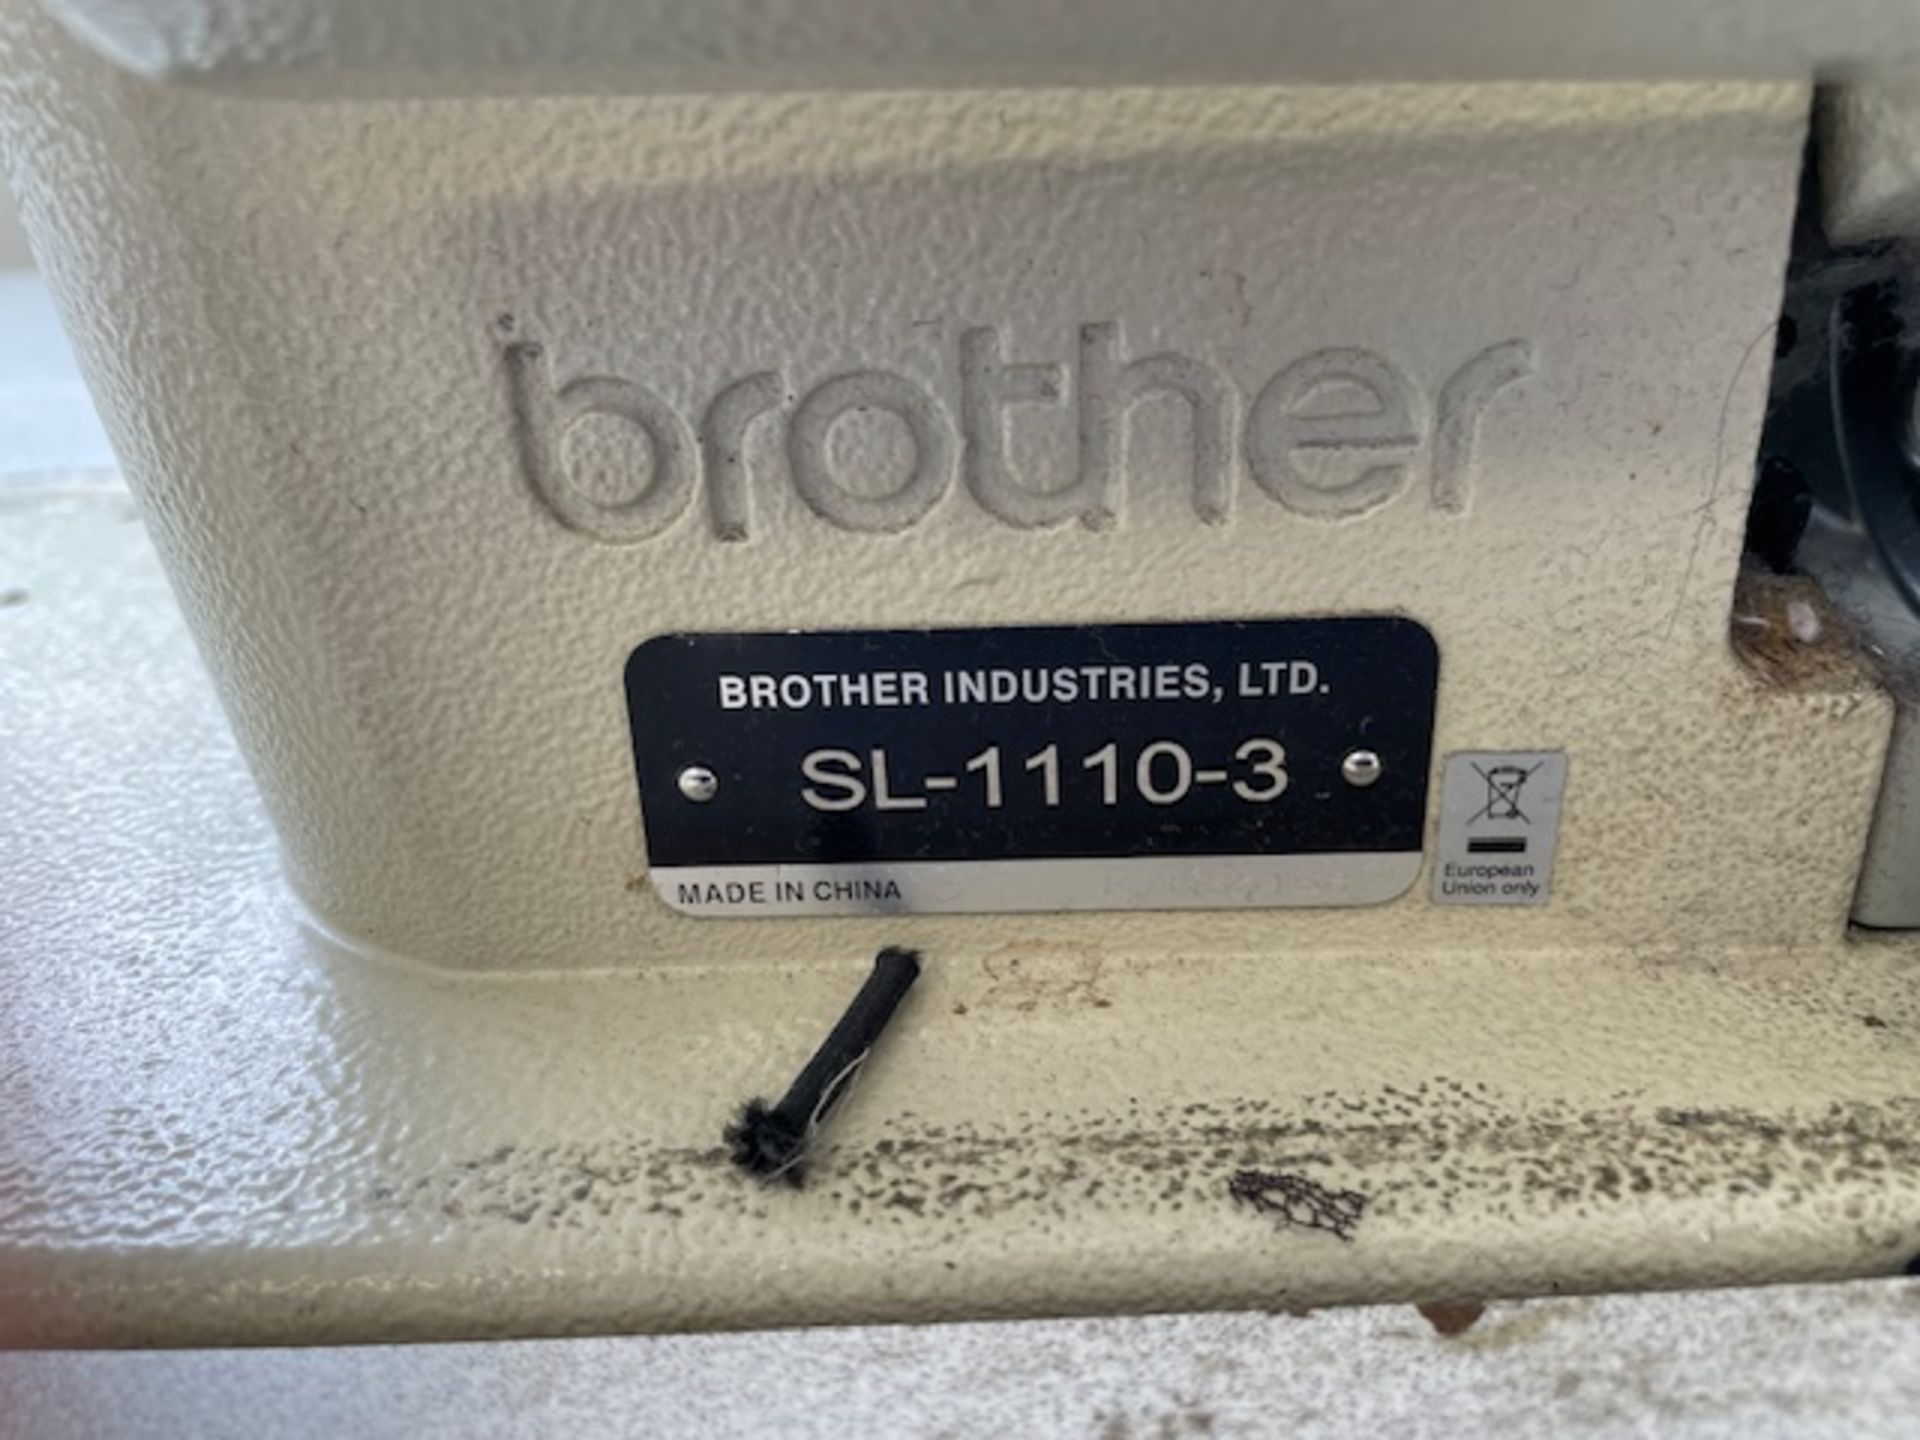 Brother SL-1110-3 Twin Needle Lockstitch, Single Phase, ZJTZ-LH Control (Location: Brentwood. Please - Image 2 of 2